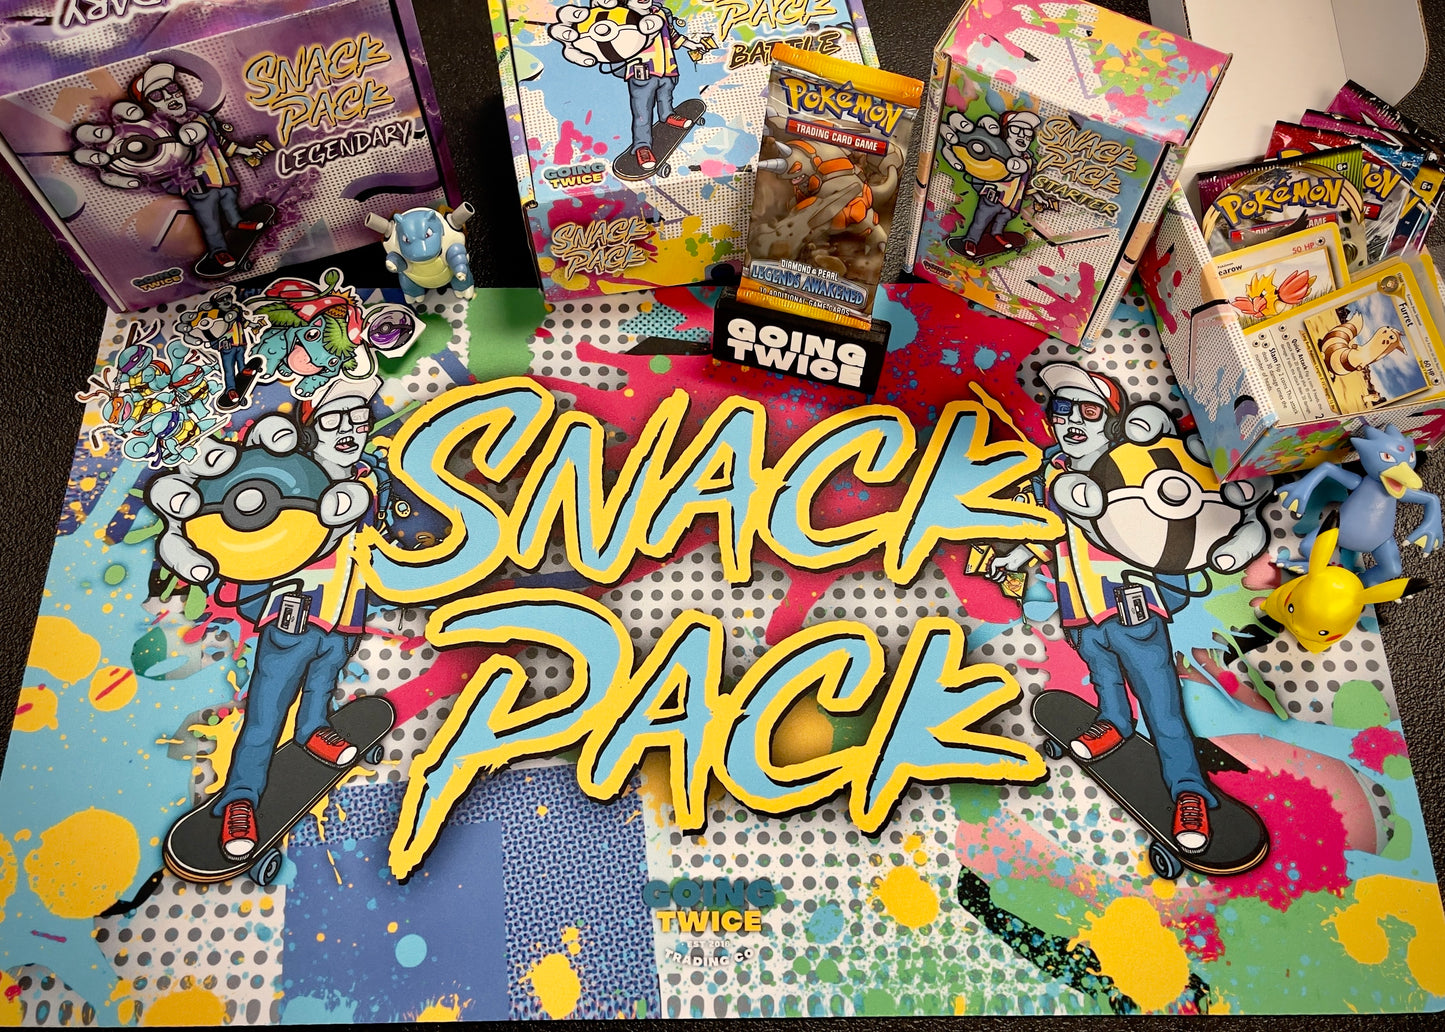 Snack Pack Playmat - 14x24